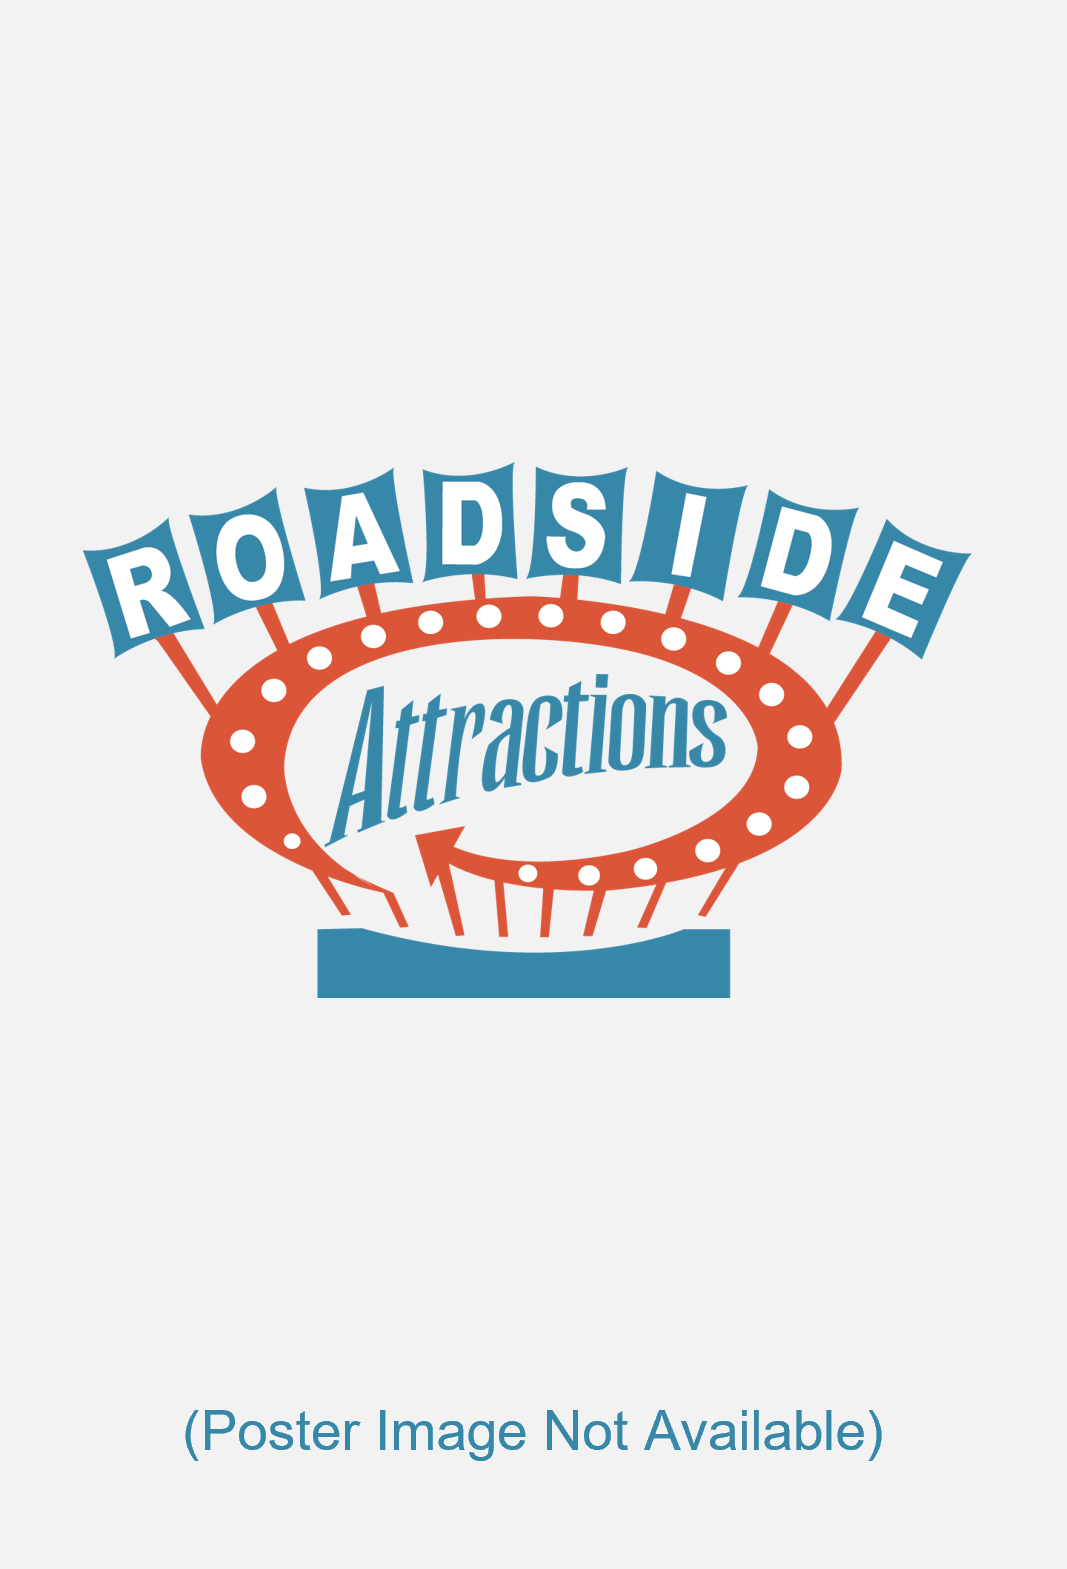 FPO-Roadside Attractions